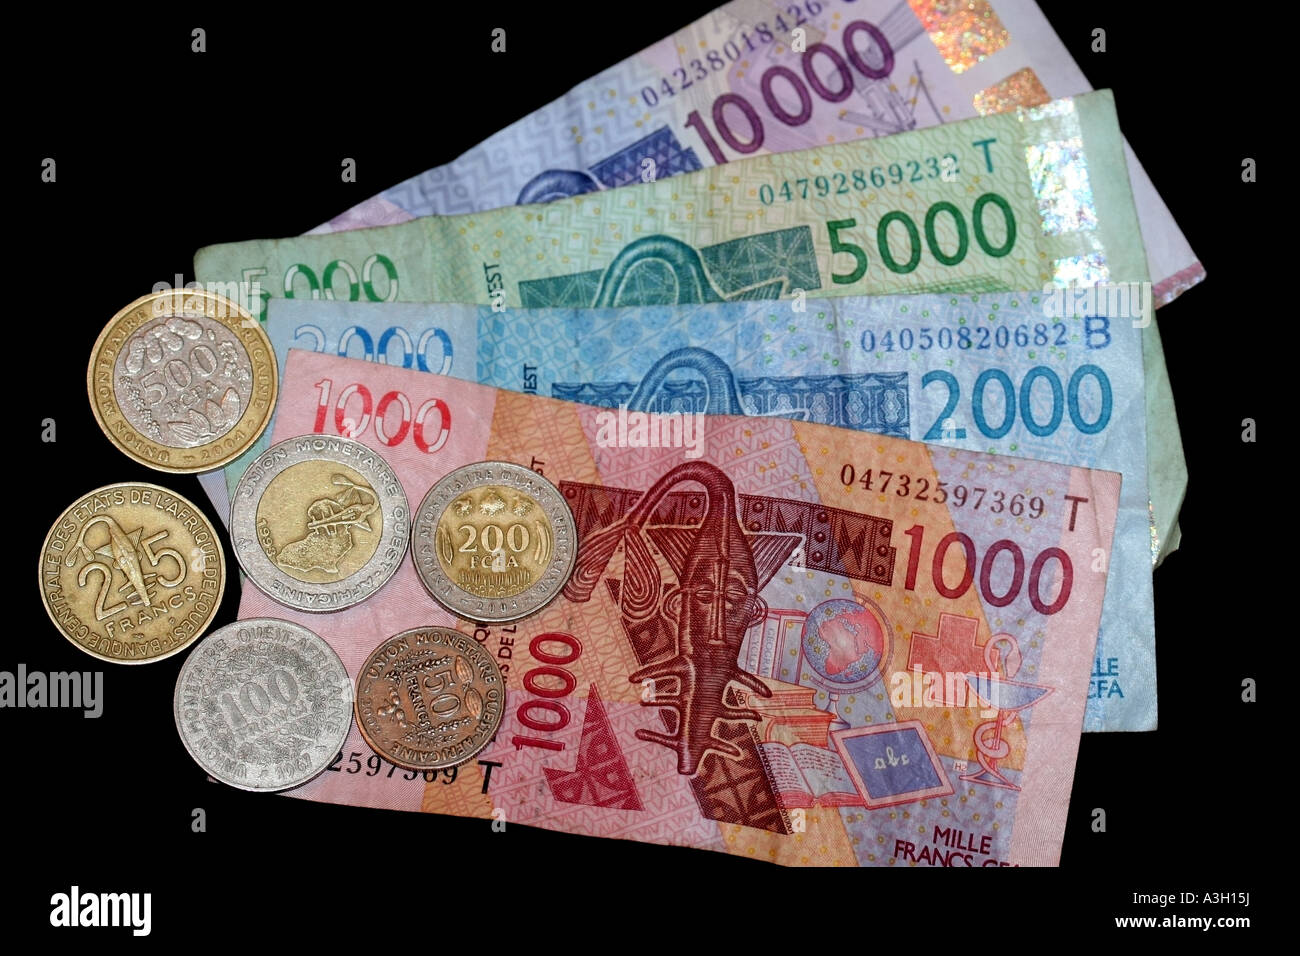 Franc Cfa High Resolution Stock Photography And Images Alamy